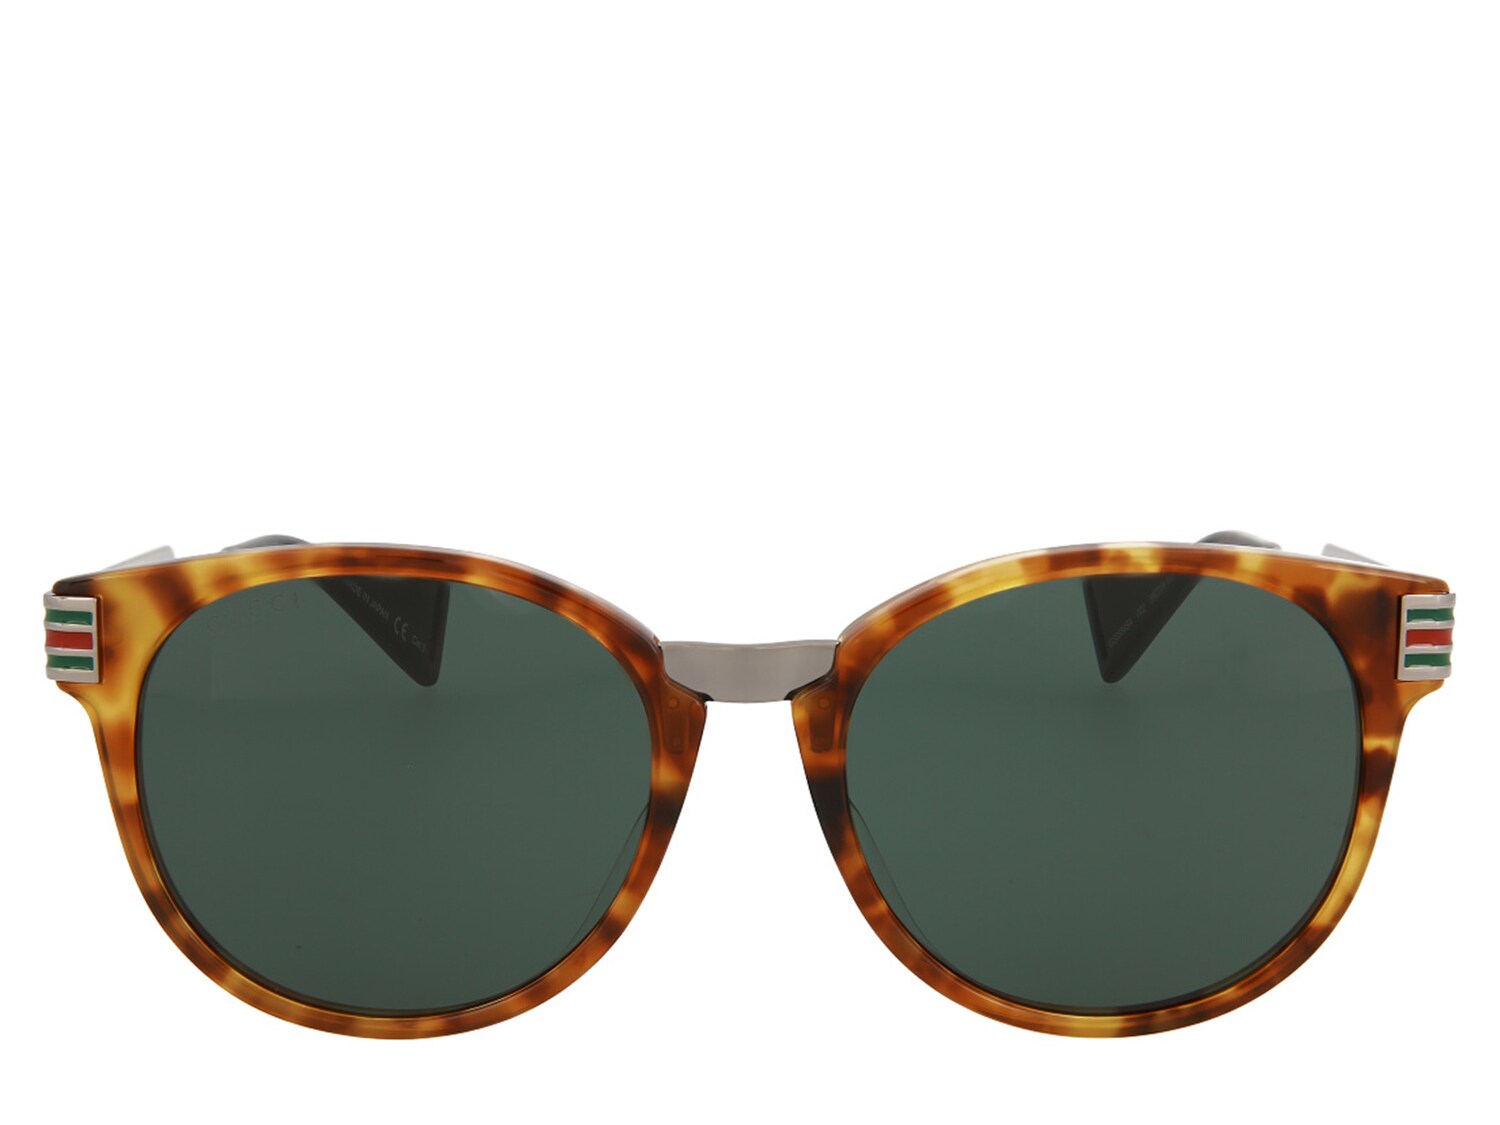 Gucci Round Sunglasses - FINAL SALE - Free Shipping | DSW